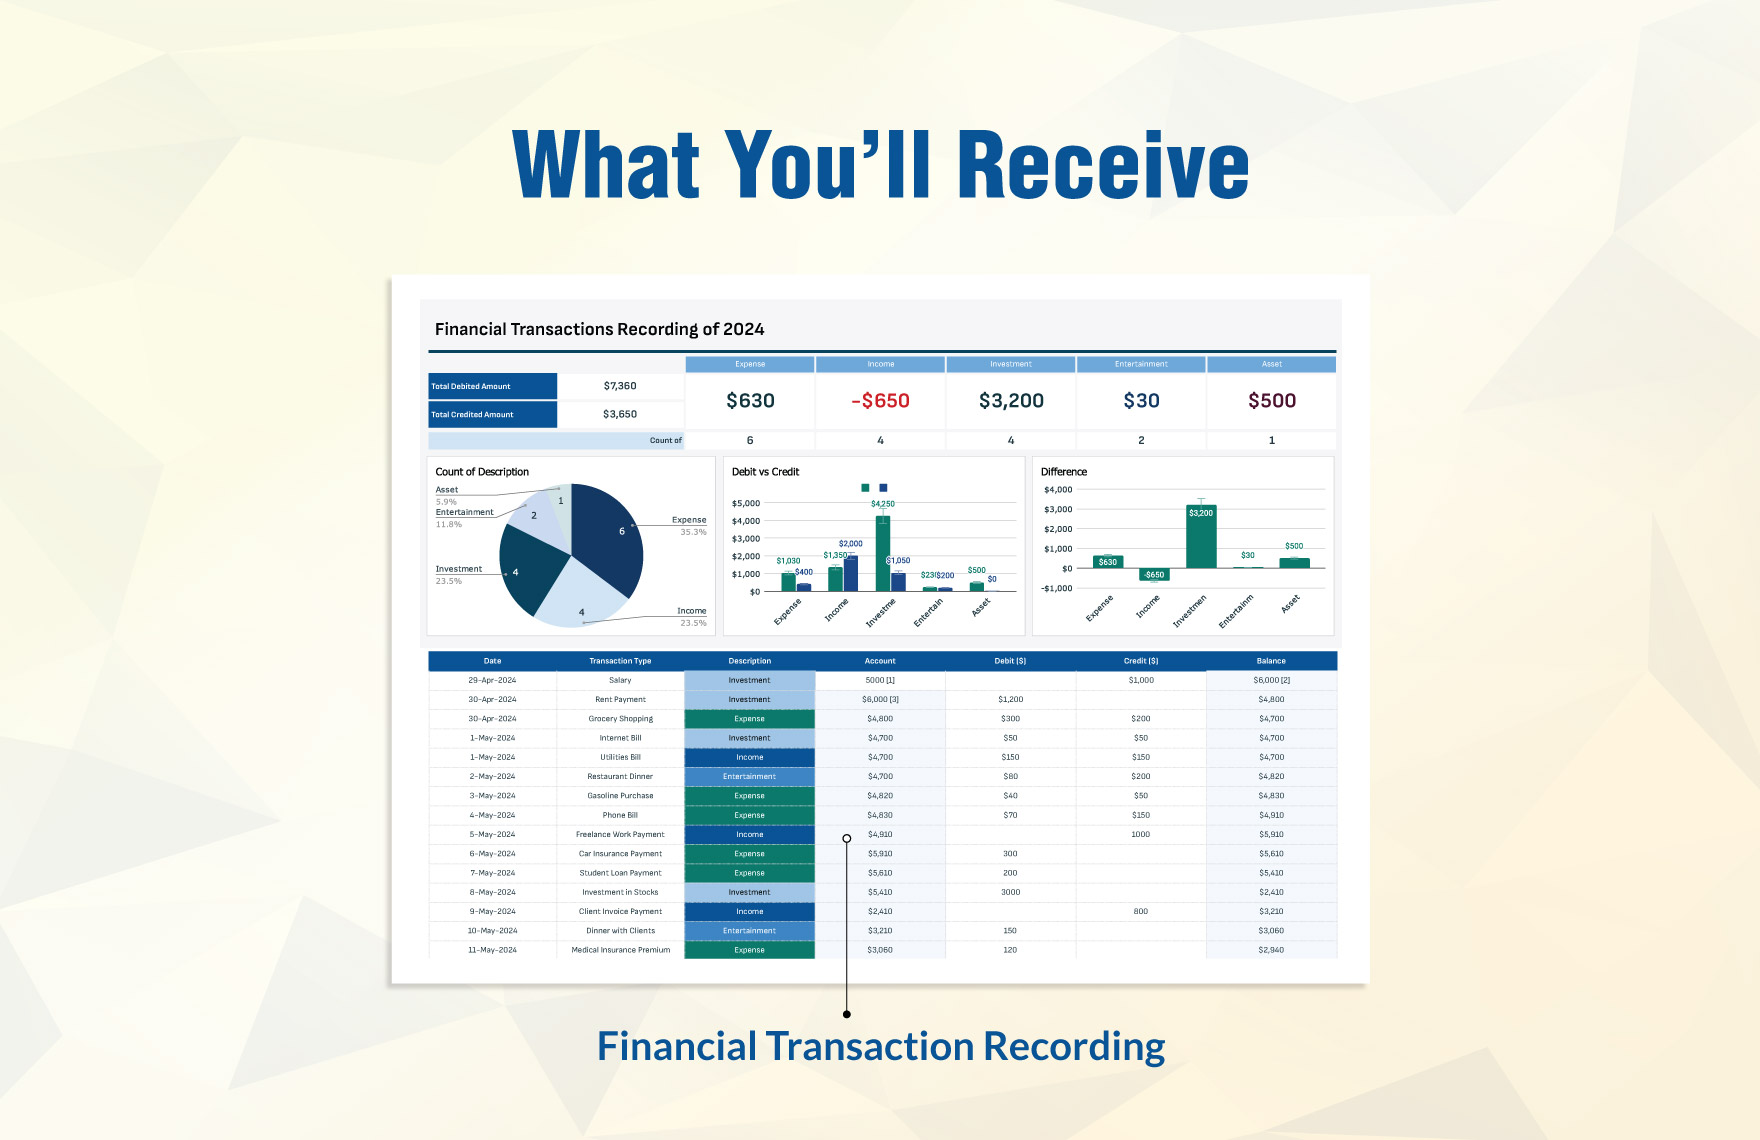 Financial Transactions Recording Template